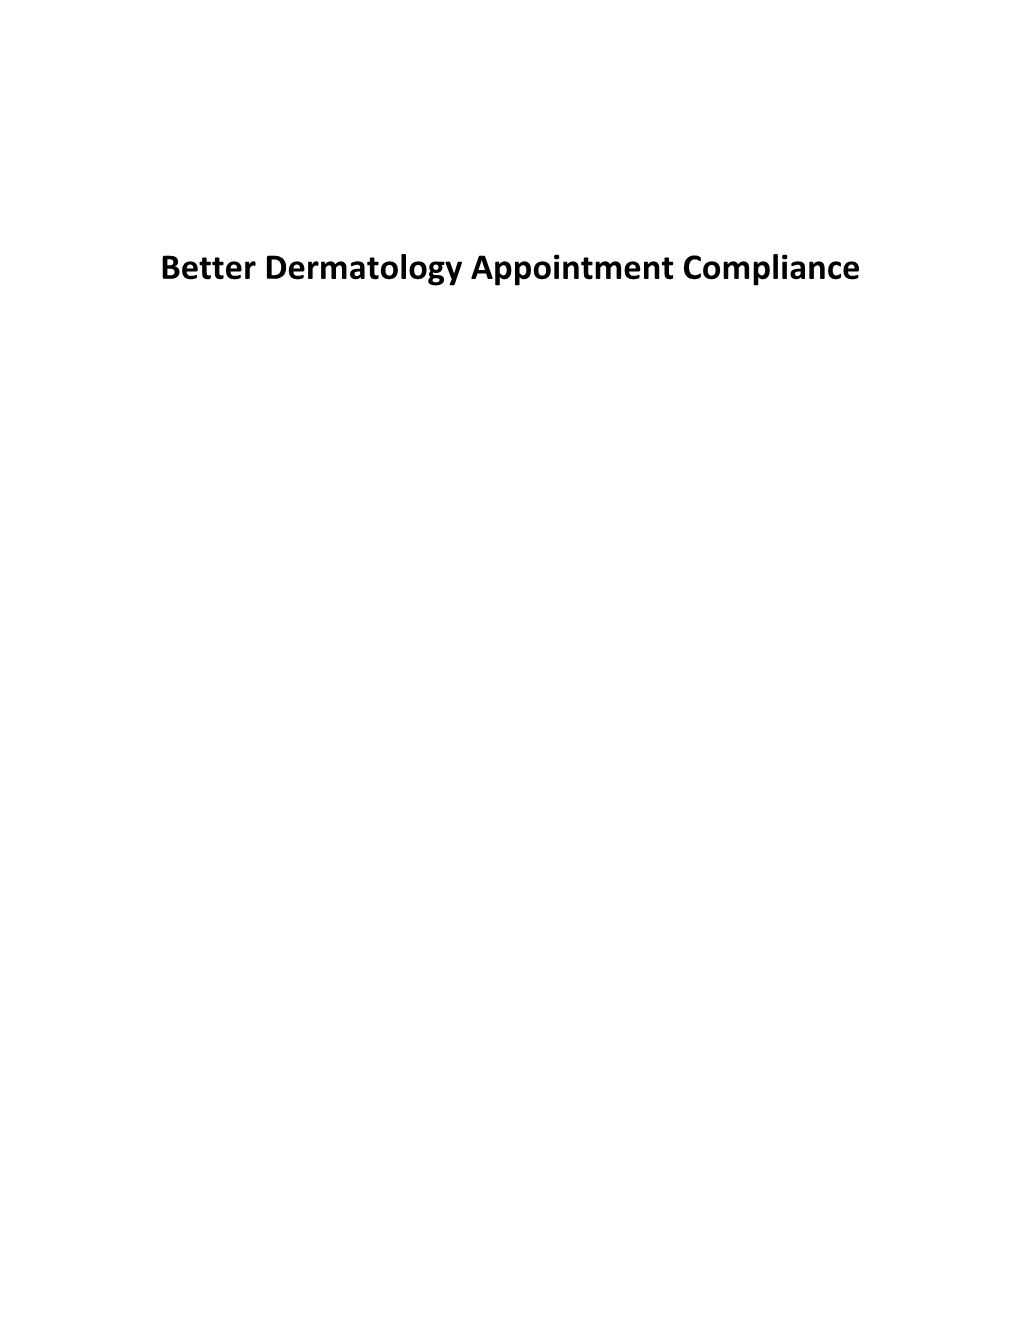 Dermatology Appointment Compliance 10 Common Characteristics Ofhighly Successful Practices Keith a Hnilica DVM, MS, DACVD